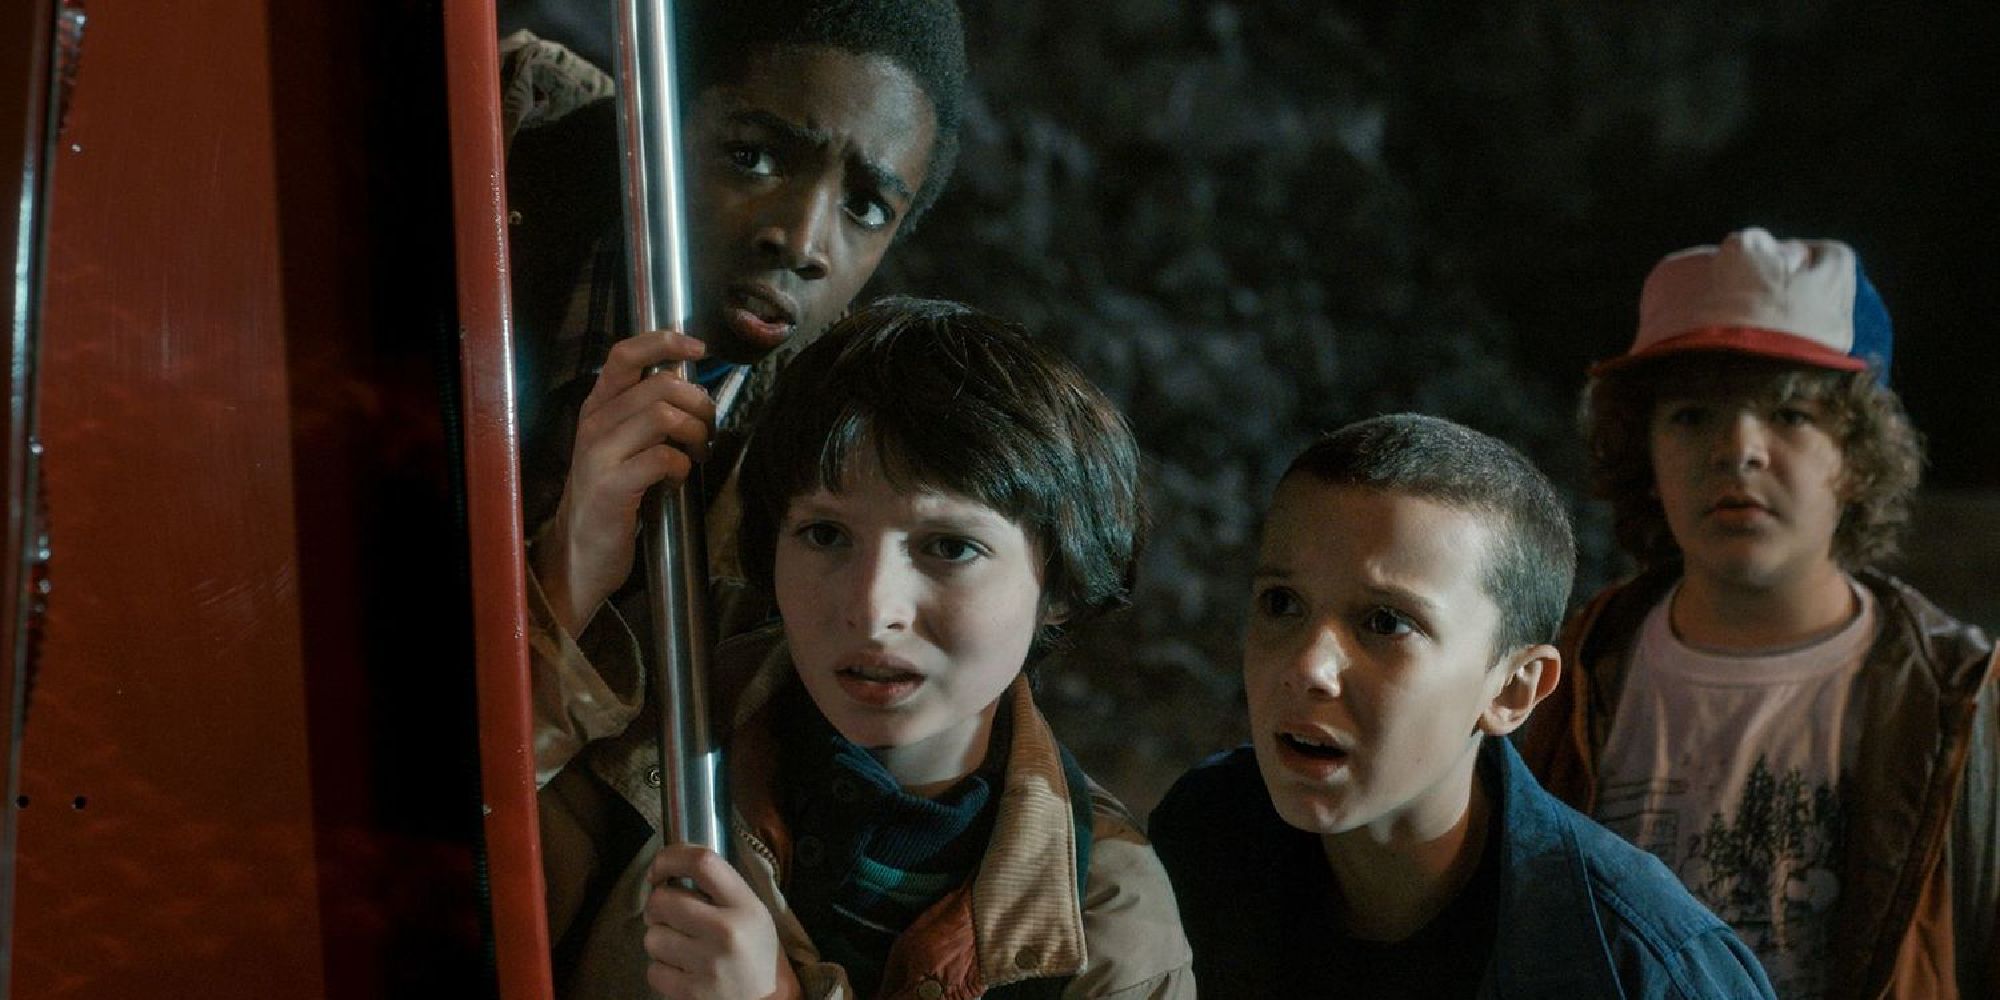 Lucas, Mike, Eleven, and Dustin hide behind a truck at the end of Season 1, Episode 3